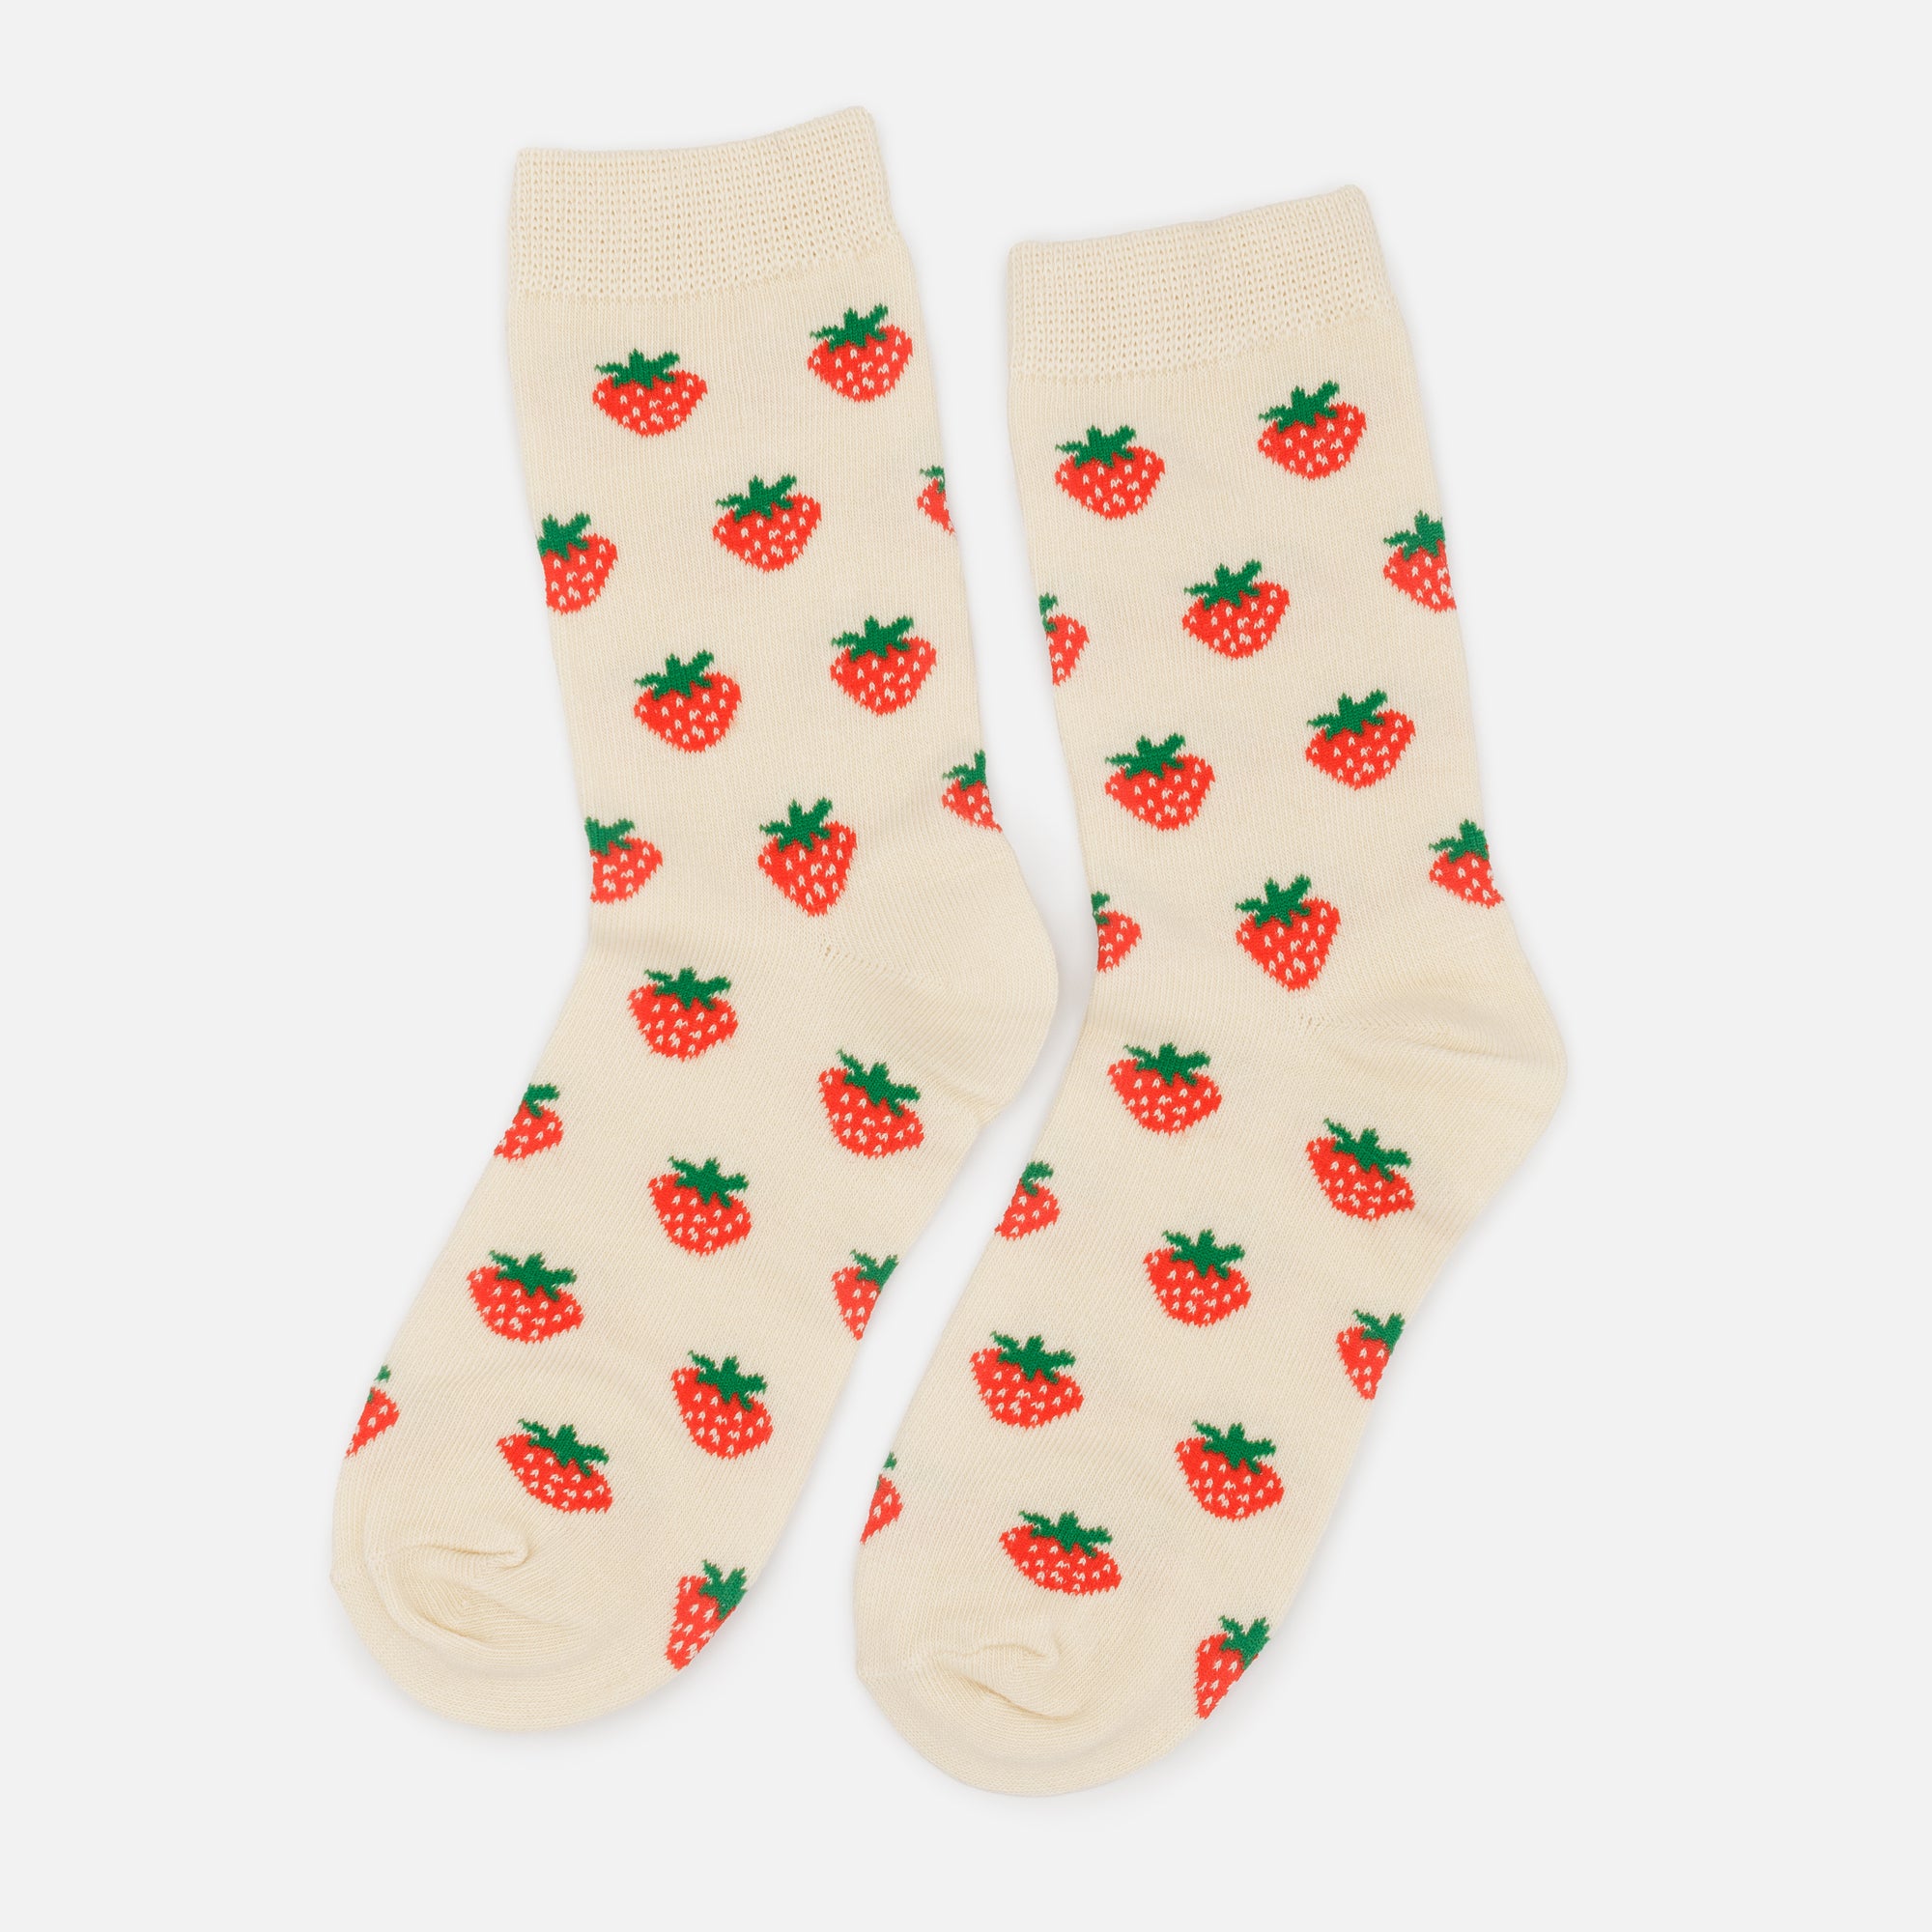 Cream stockings with small strawberries